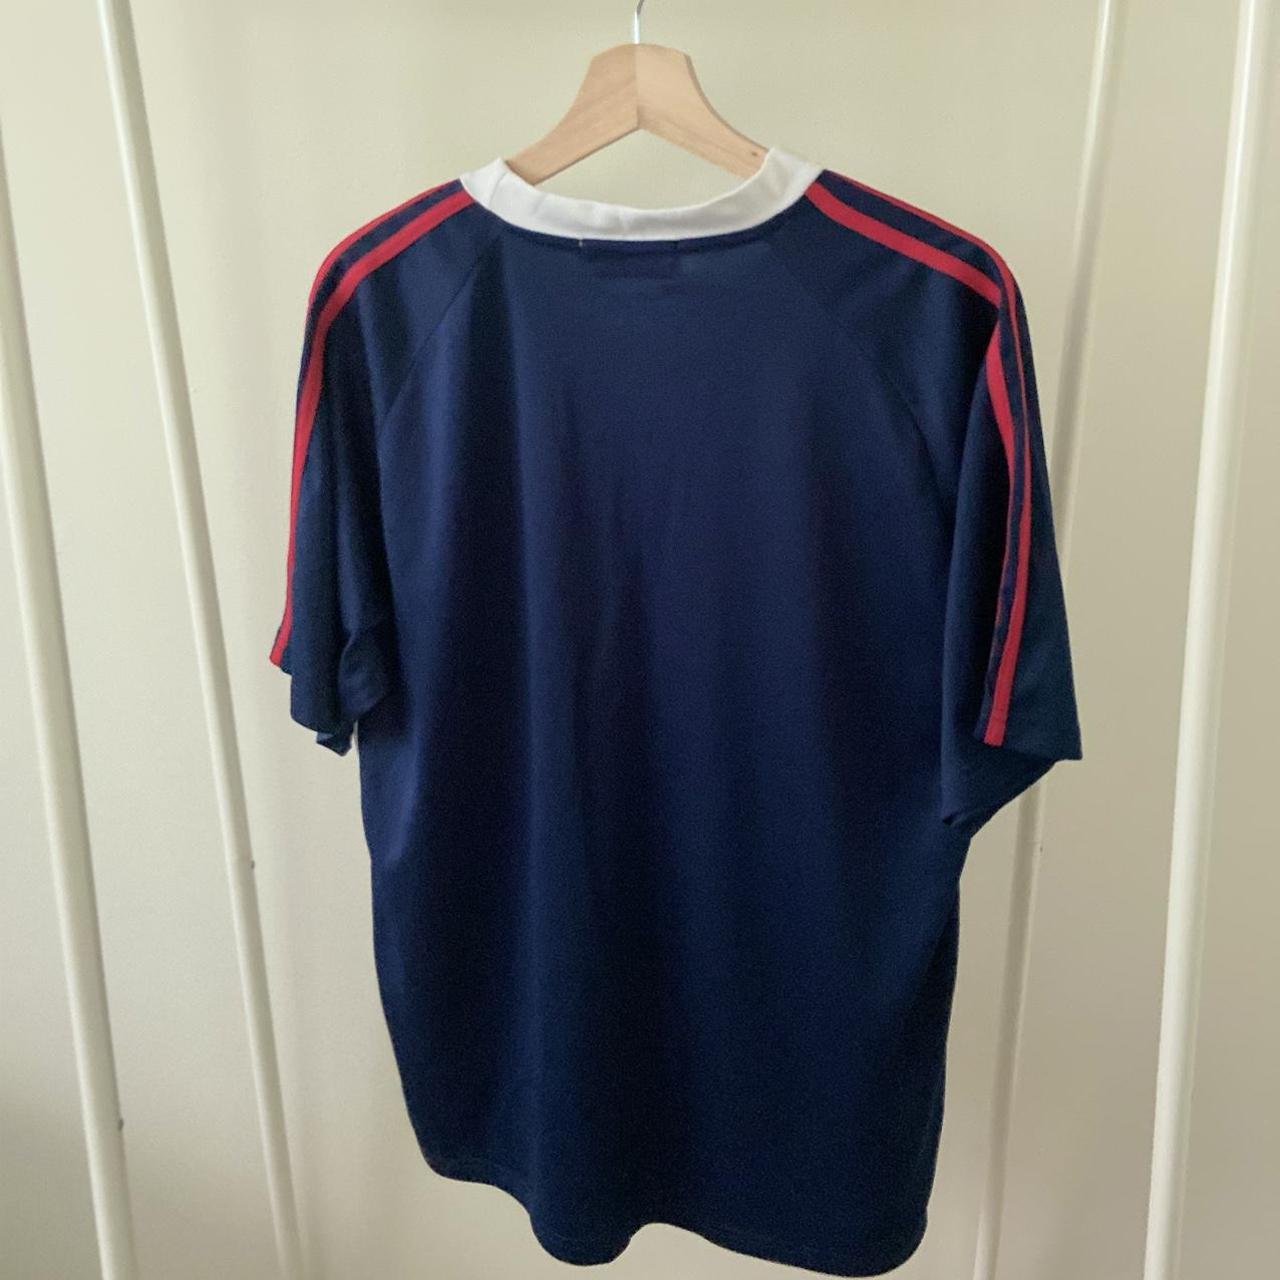 EB Sport Men's Red and Navy Top (2)